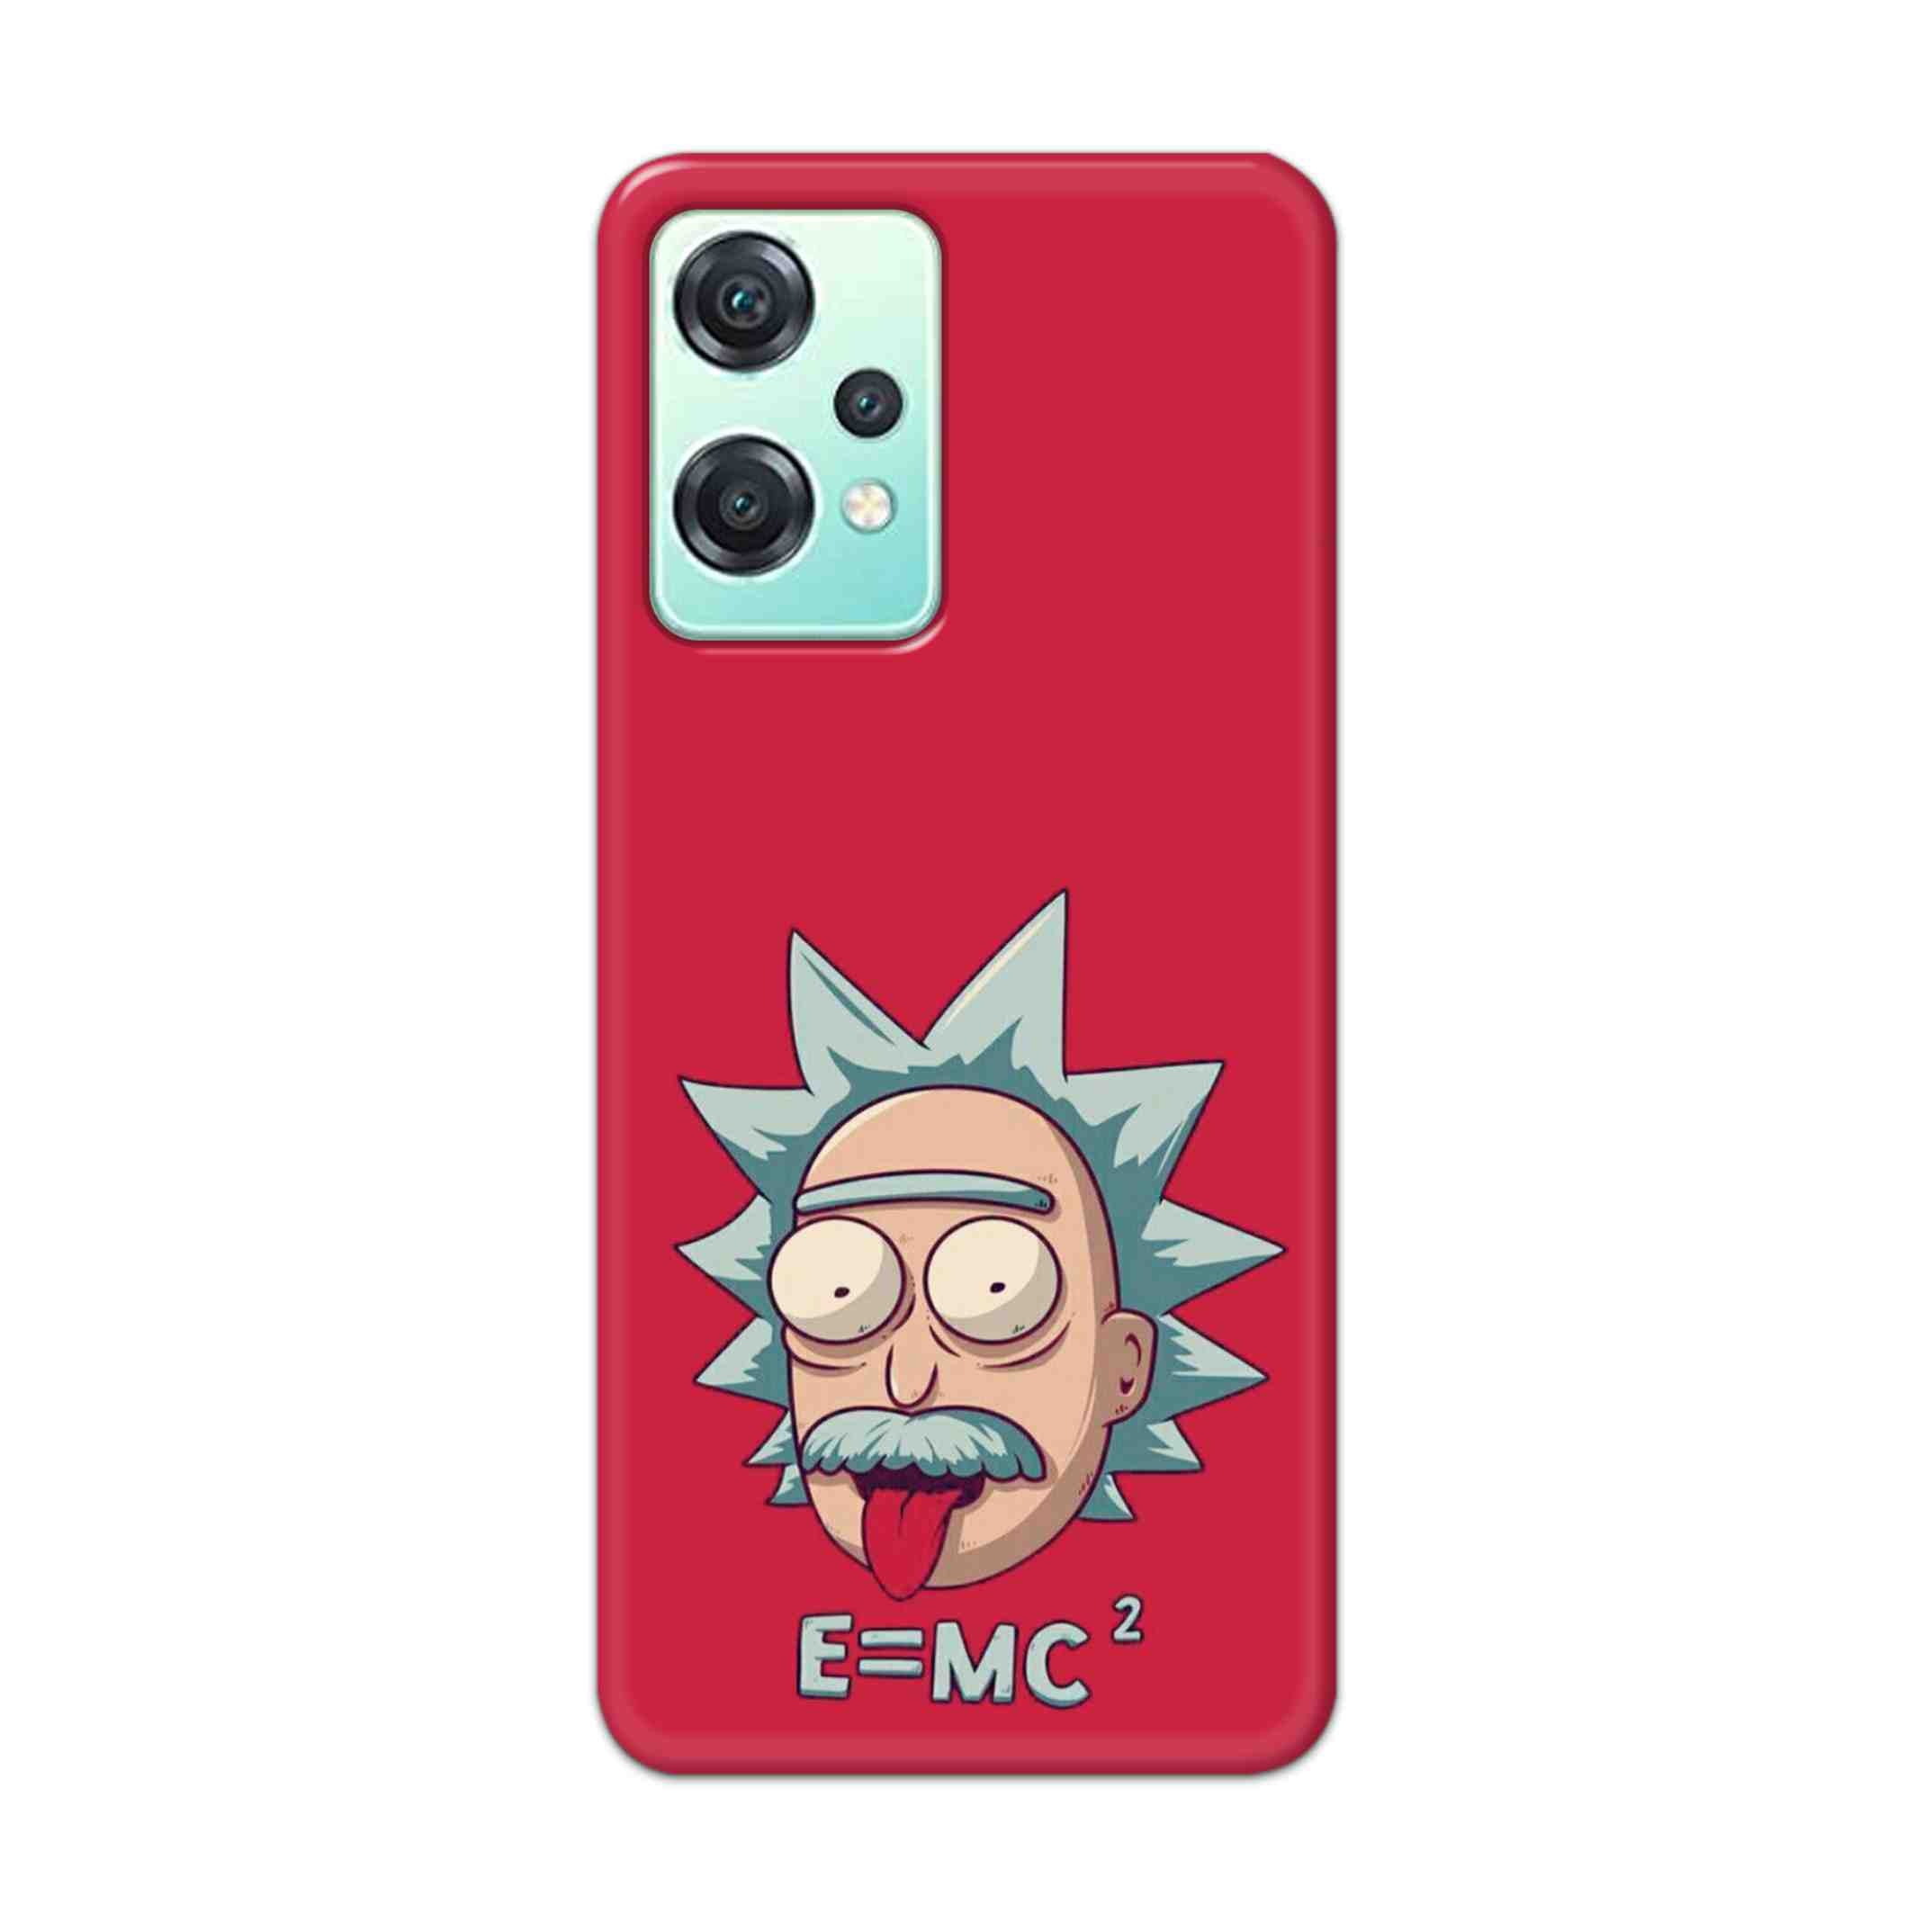 Buy E=Mc Hard Back Mobile Phone Case Cover For OnePlus Nord CE 2 Lite 5G Online